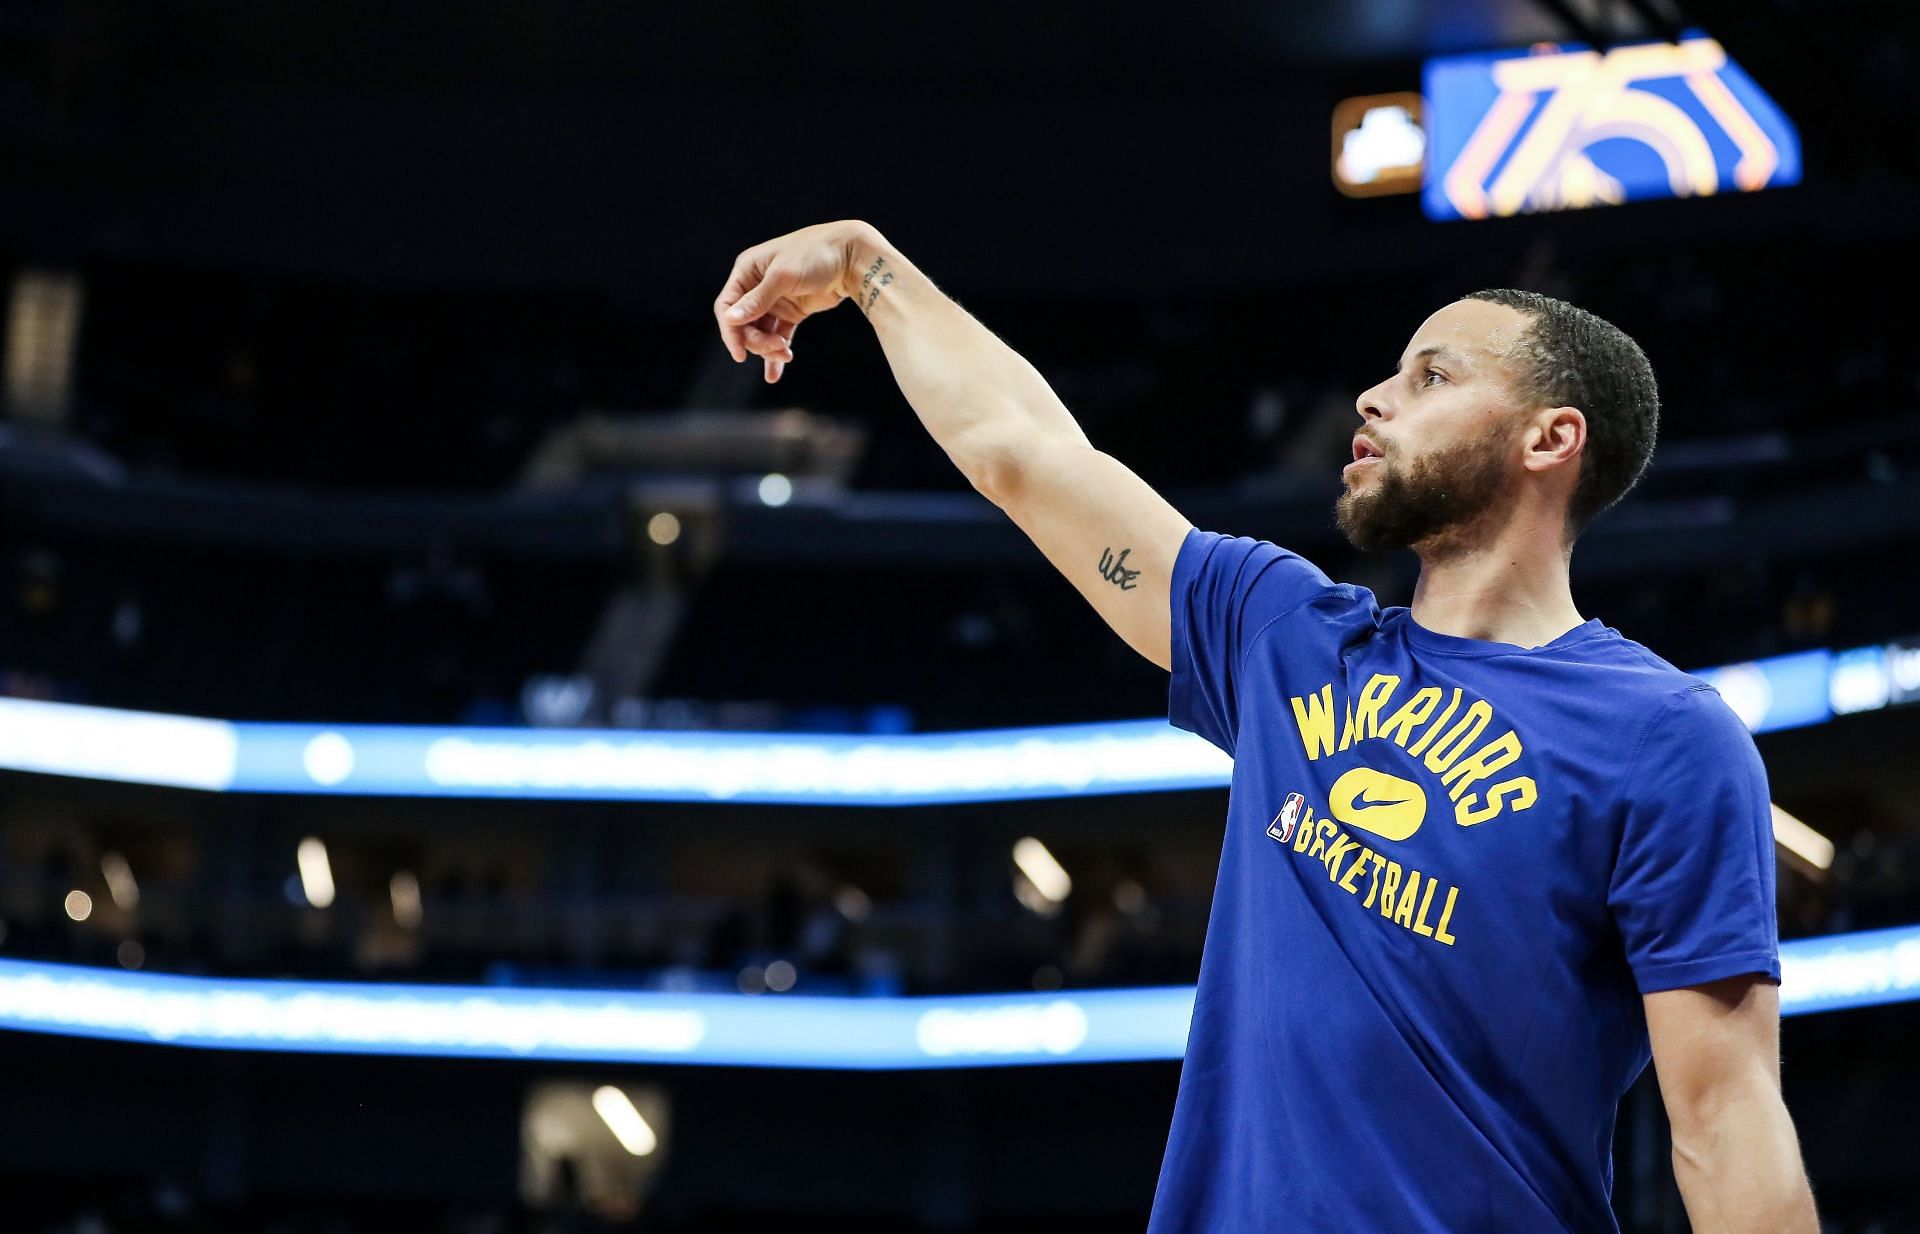 Steph Curry of the Golden State Warriors will hope to continue his good form.